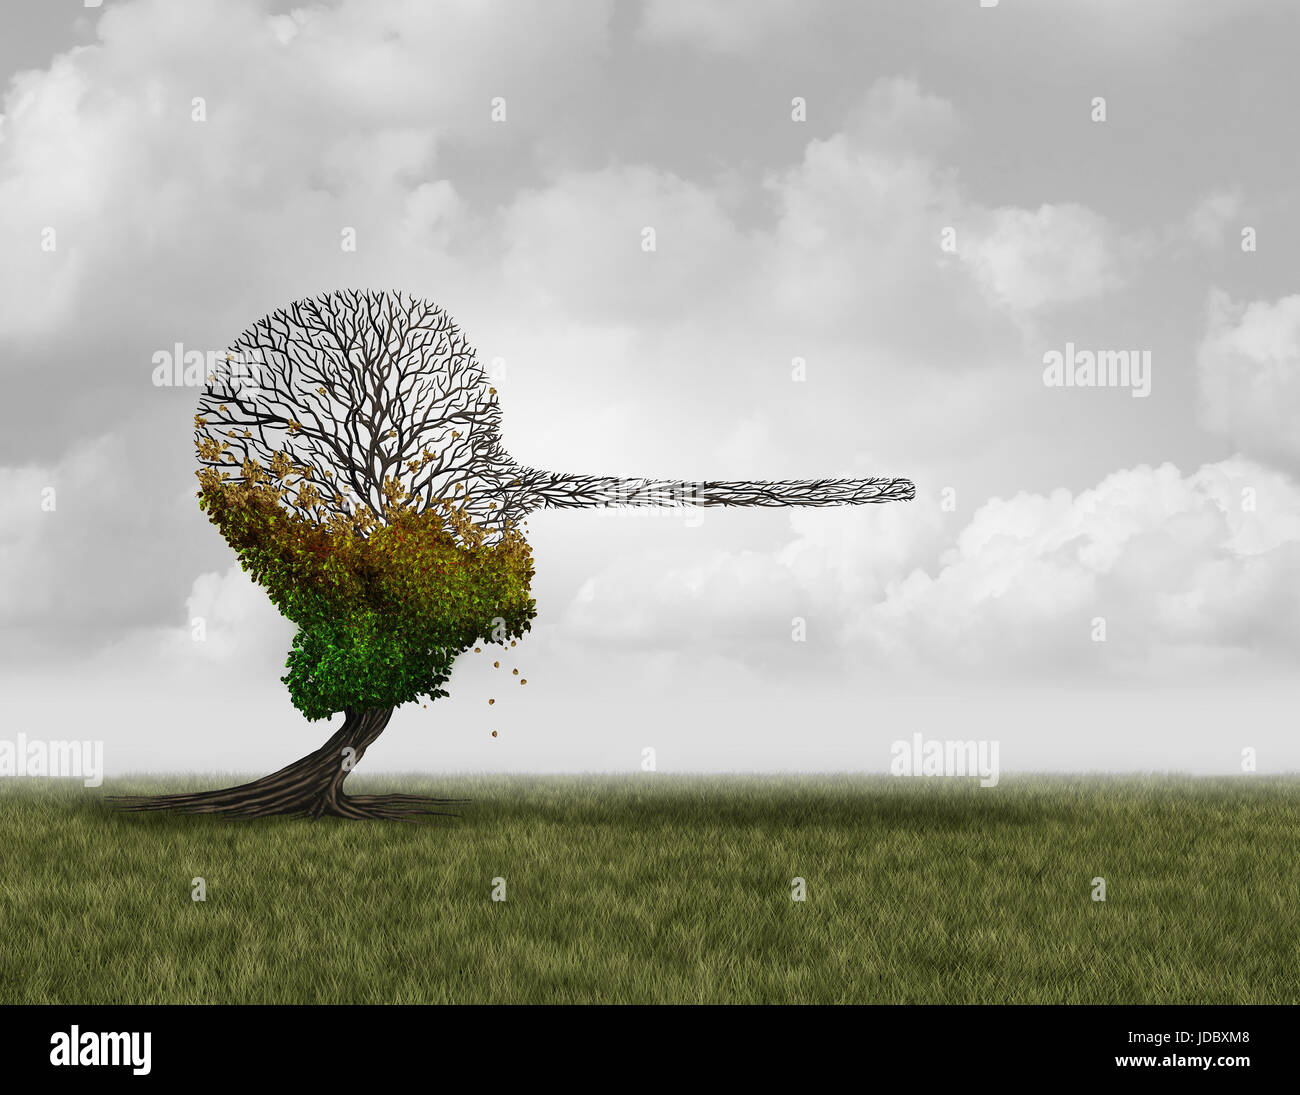 Climate change denier concept as a dying sick tree shaped as a human head with a long nose as a surreal environmental metaphor. Stock Photo